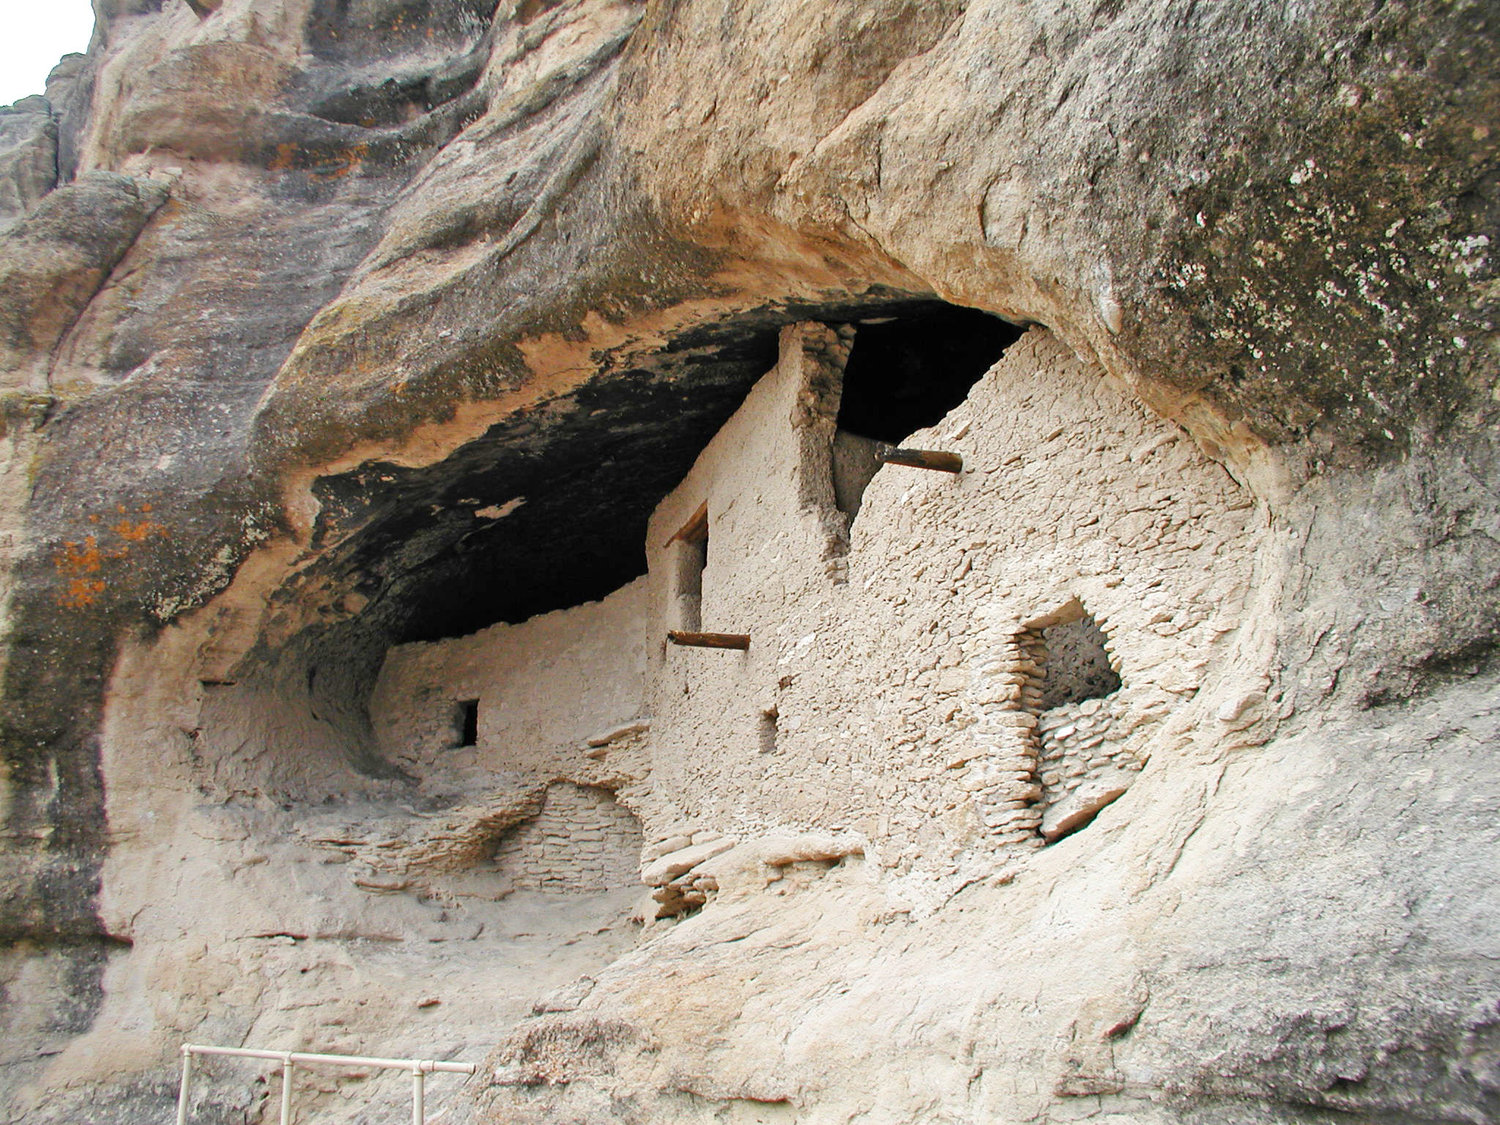 The Gila Cliff Dwellings are reopening on June 17 after being closed because of the Johnson Fire for more than two weeks.